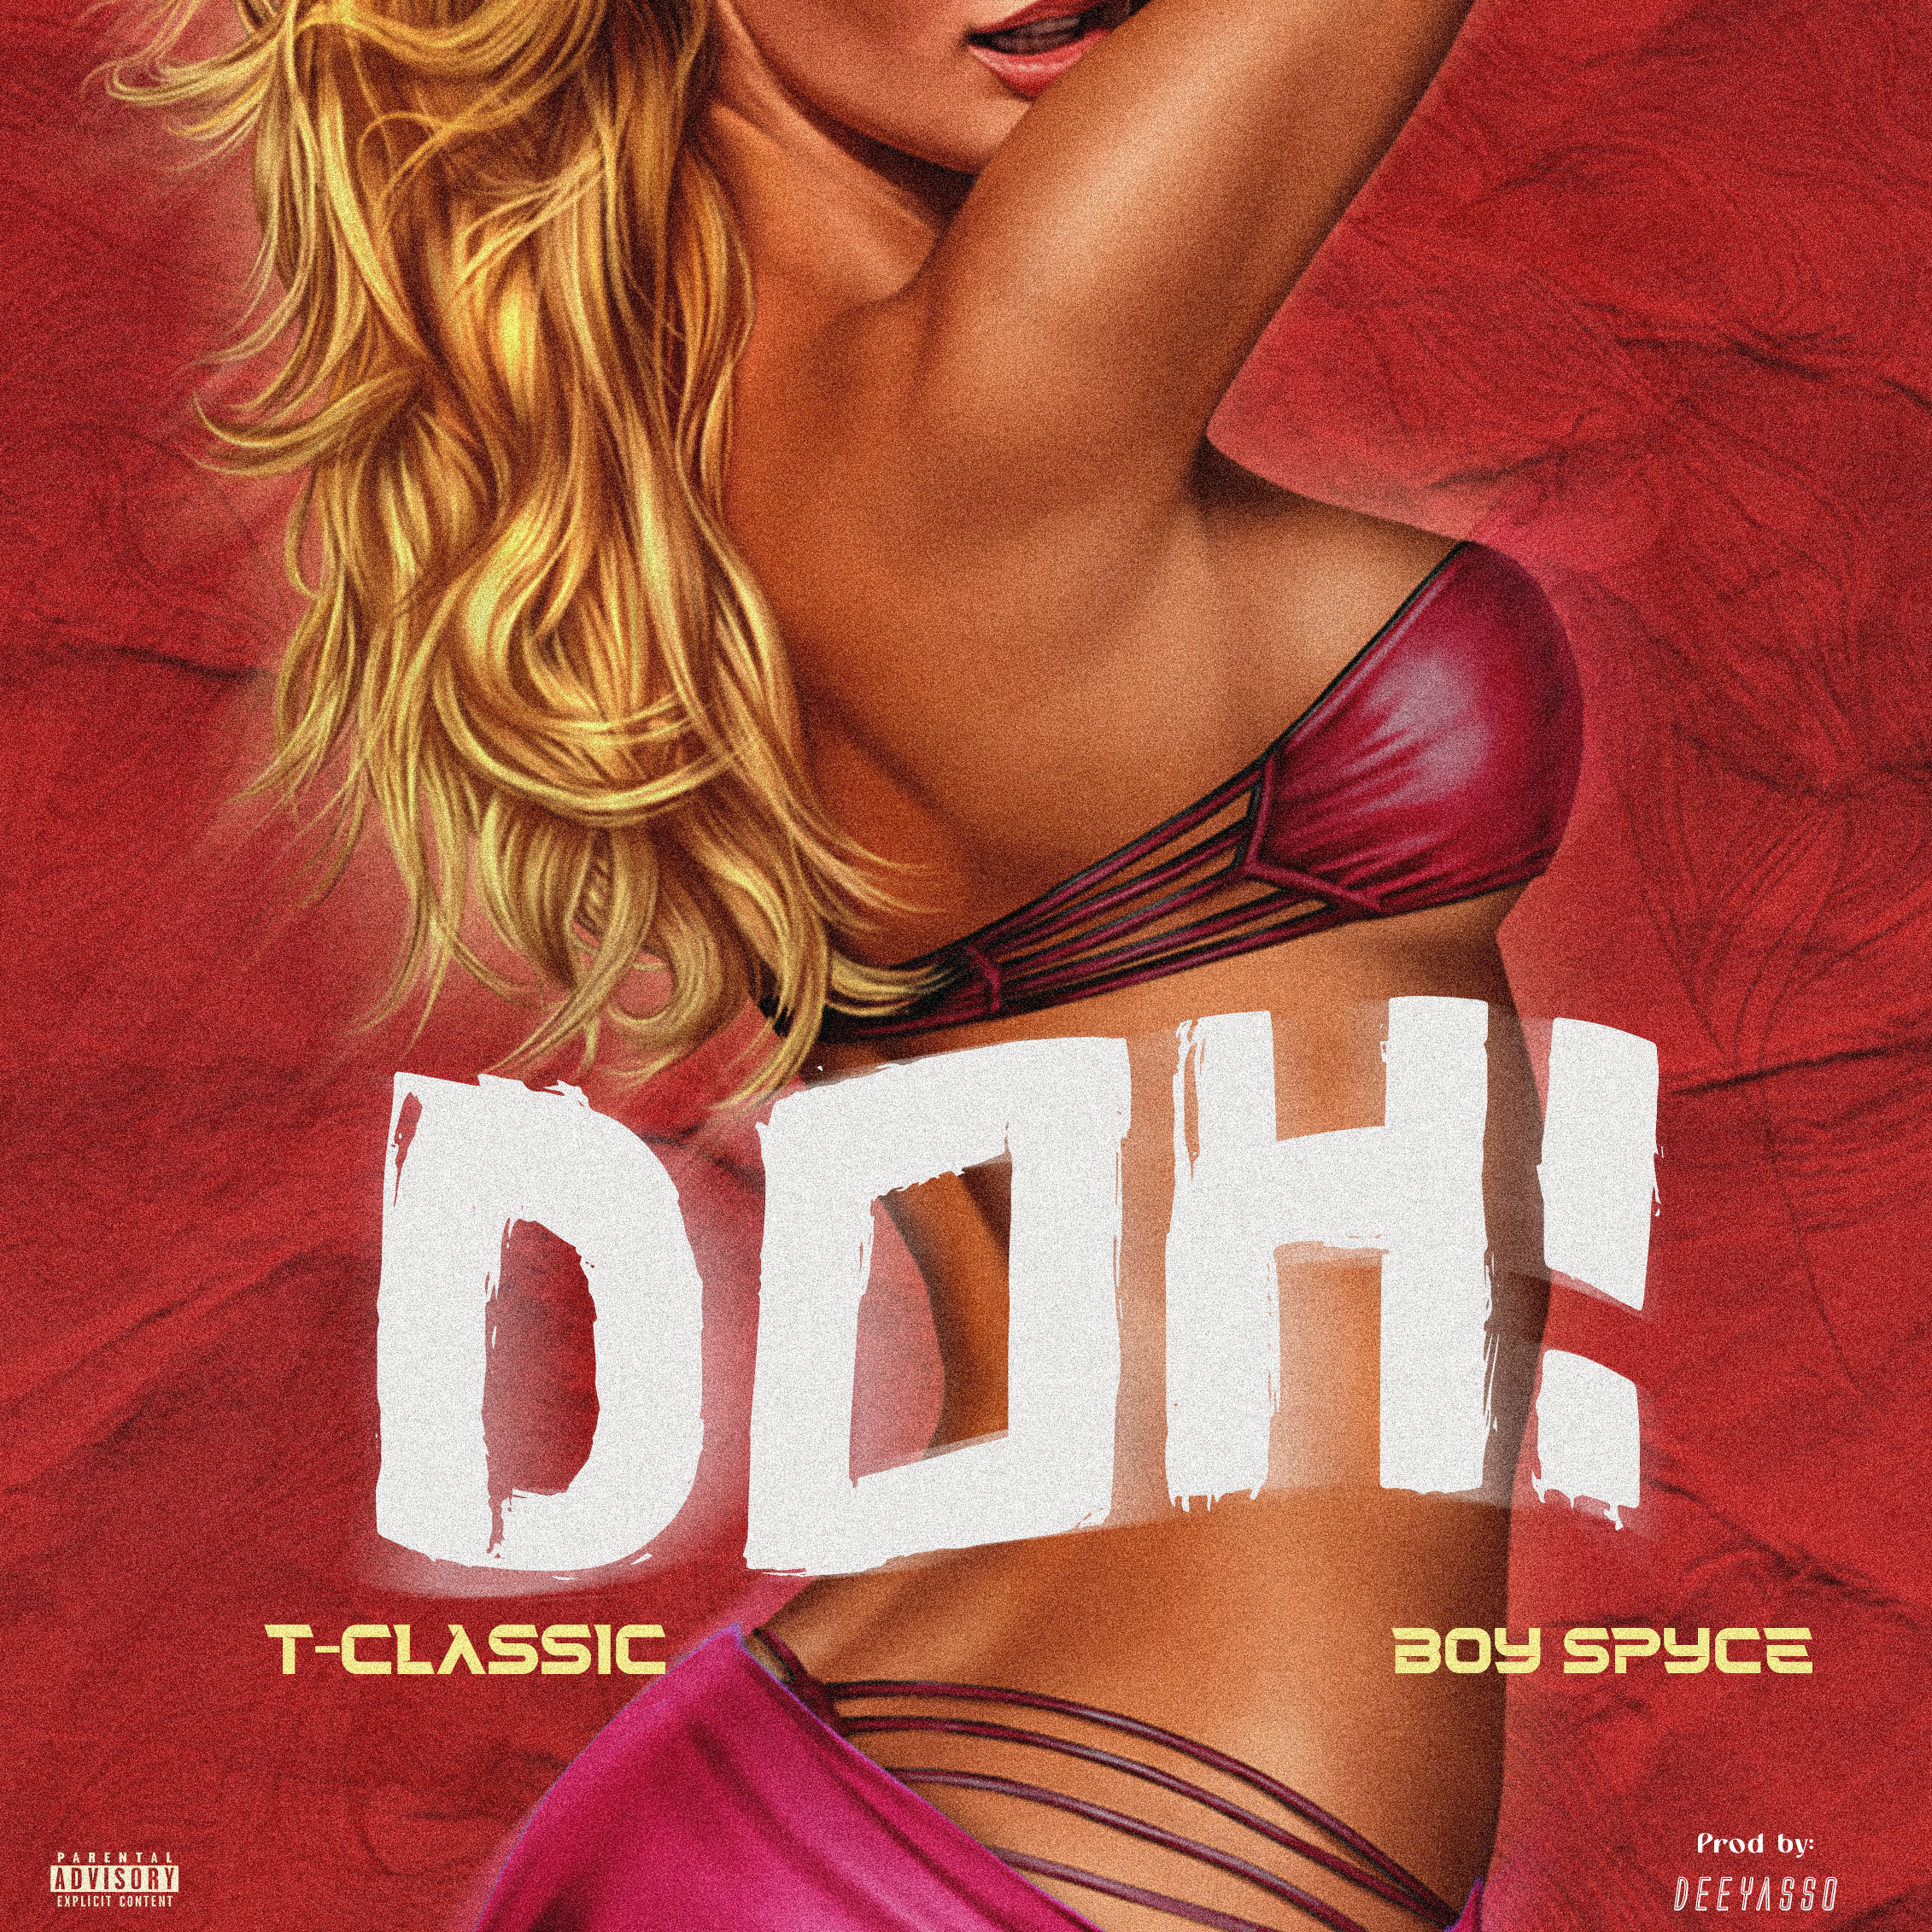 “Doh”: A Soul-Stirring Love Ballad by T Classic and Boy Spyce